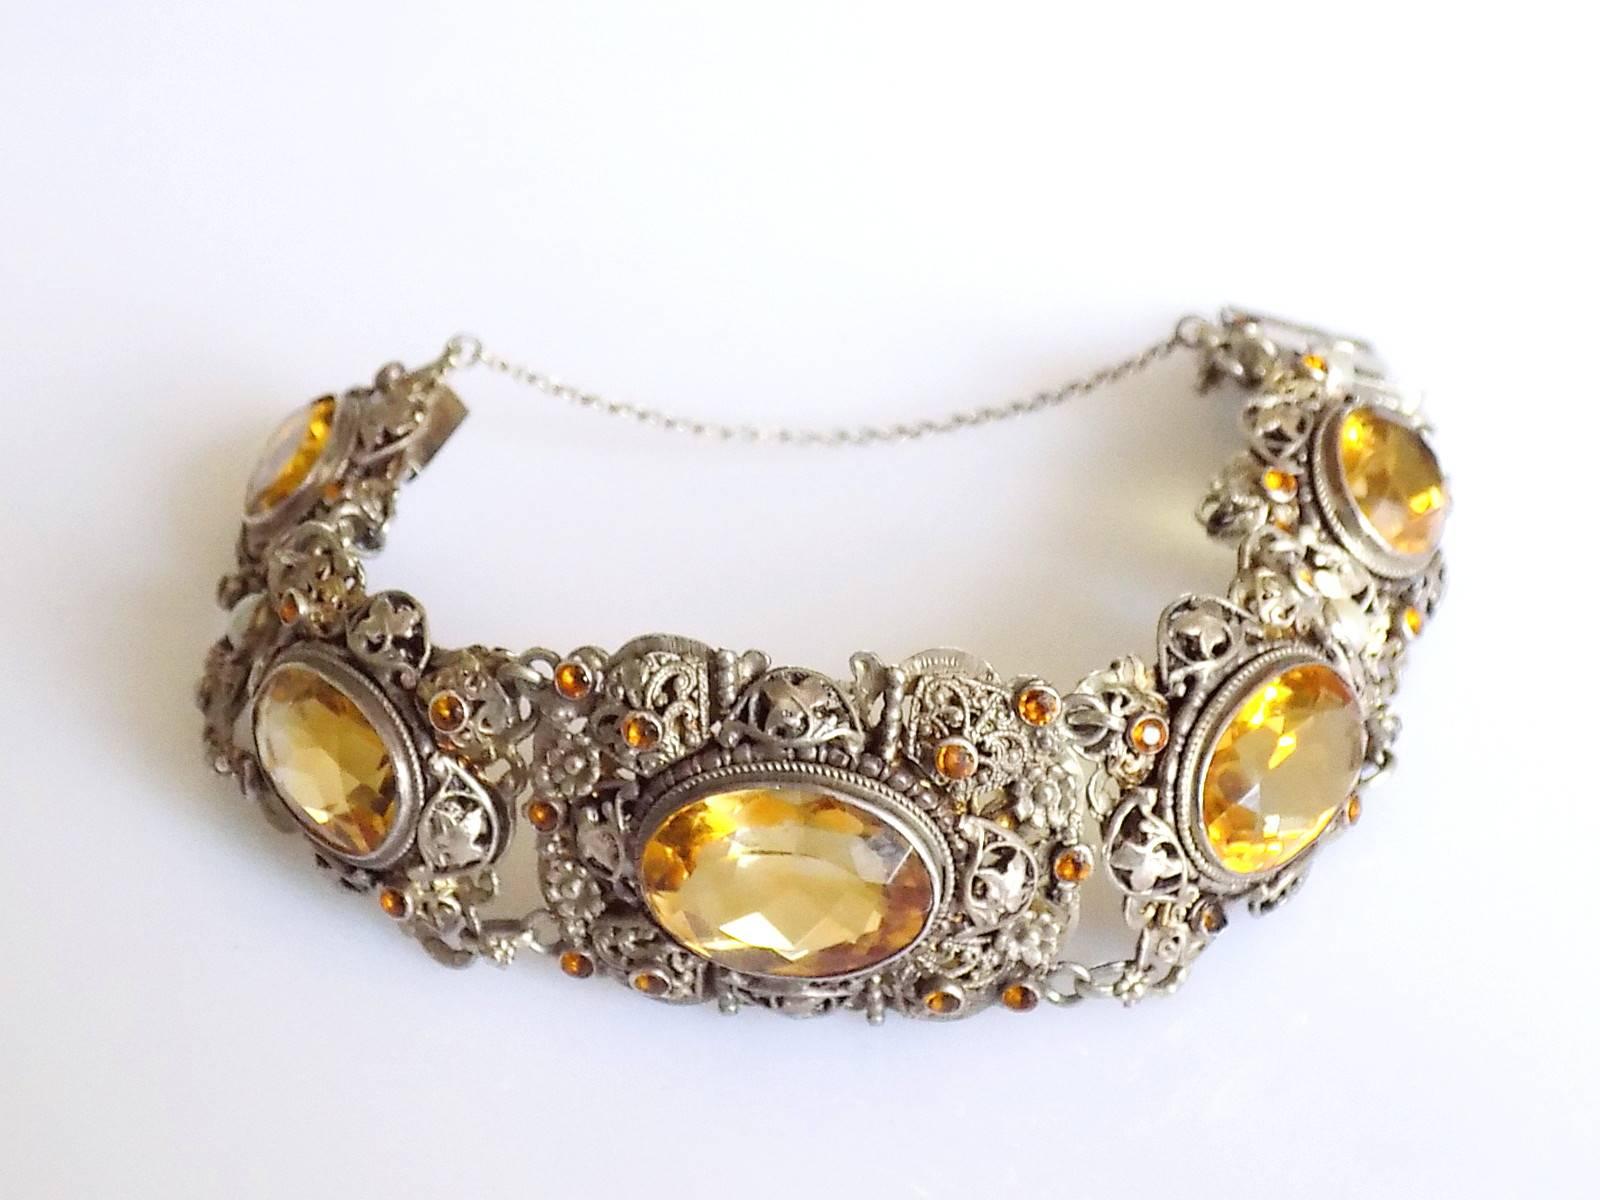 A Spectacular Antique Austro-Hungarian Silver, Natural Citrine and split Pearl bracelet. Each link beautifully designed with a large Citrine in the middle surrounded by Silver flowers, foliage and smaller Citrines. Rare and Gorgeous.
Citrine - stone